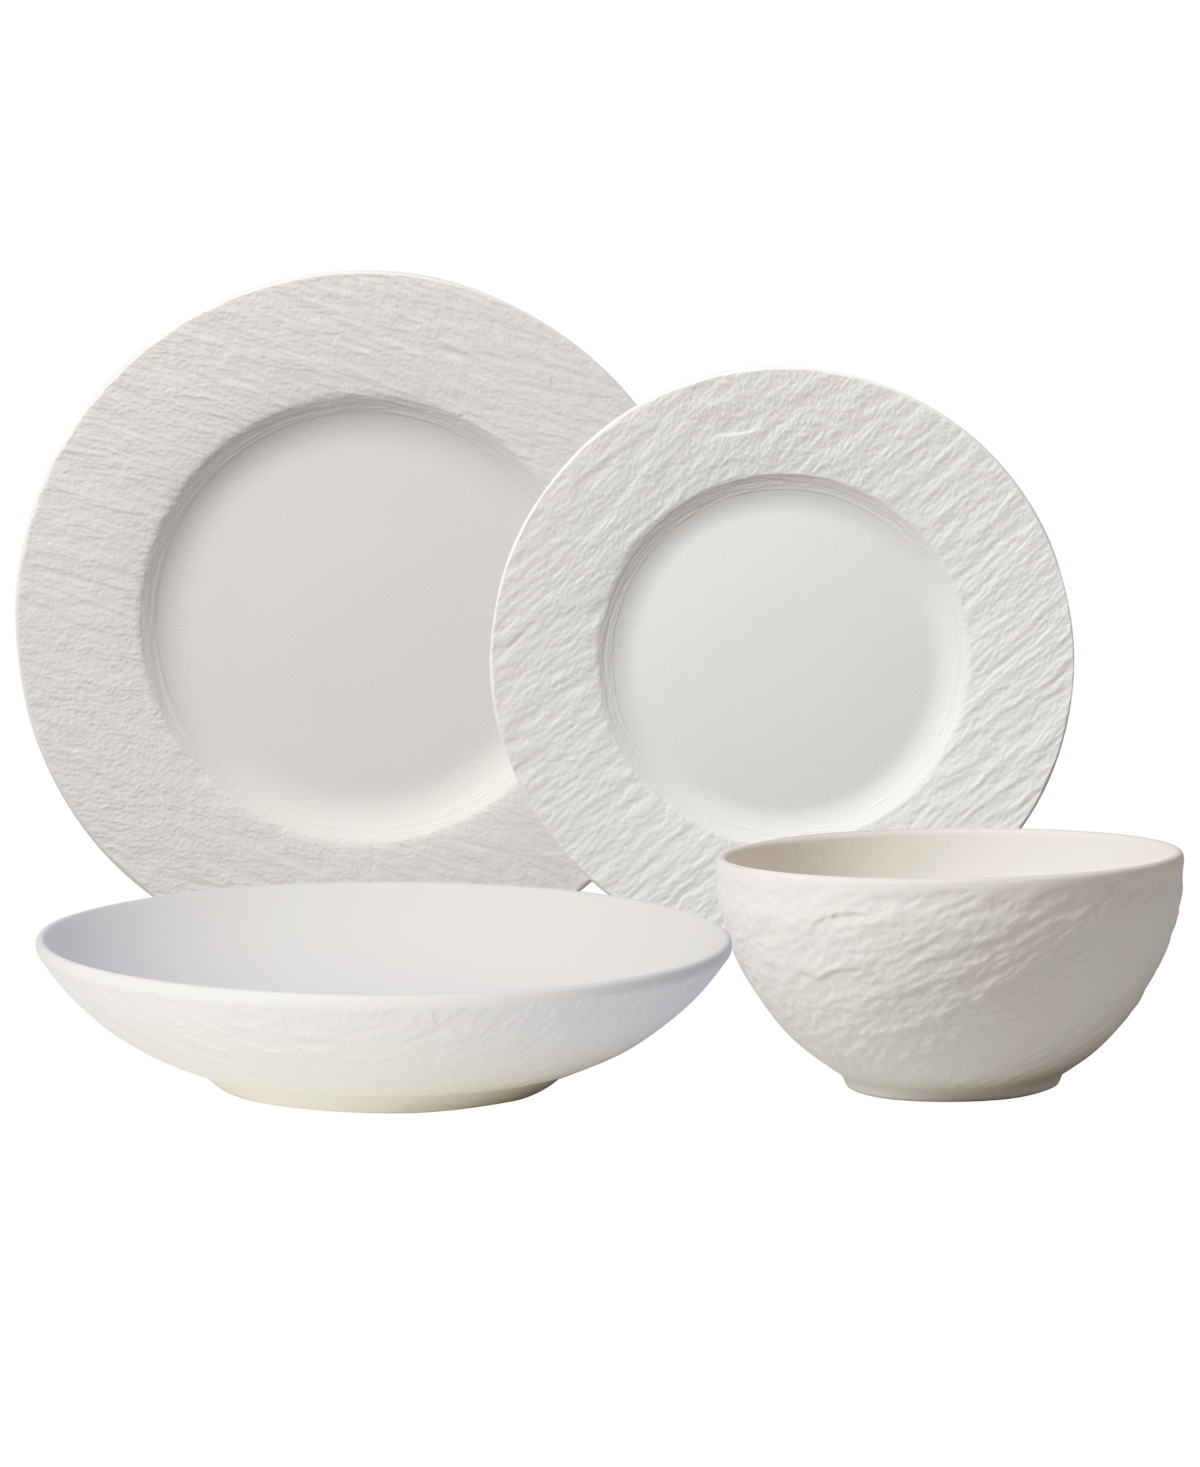 Manufacture Rock Blanc 4 Piece Place Setting - White